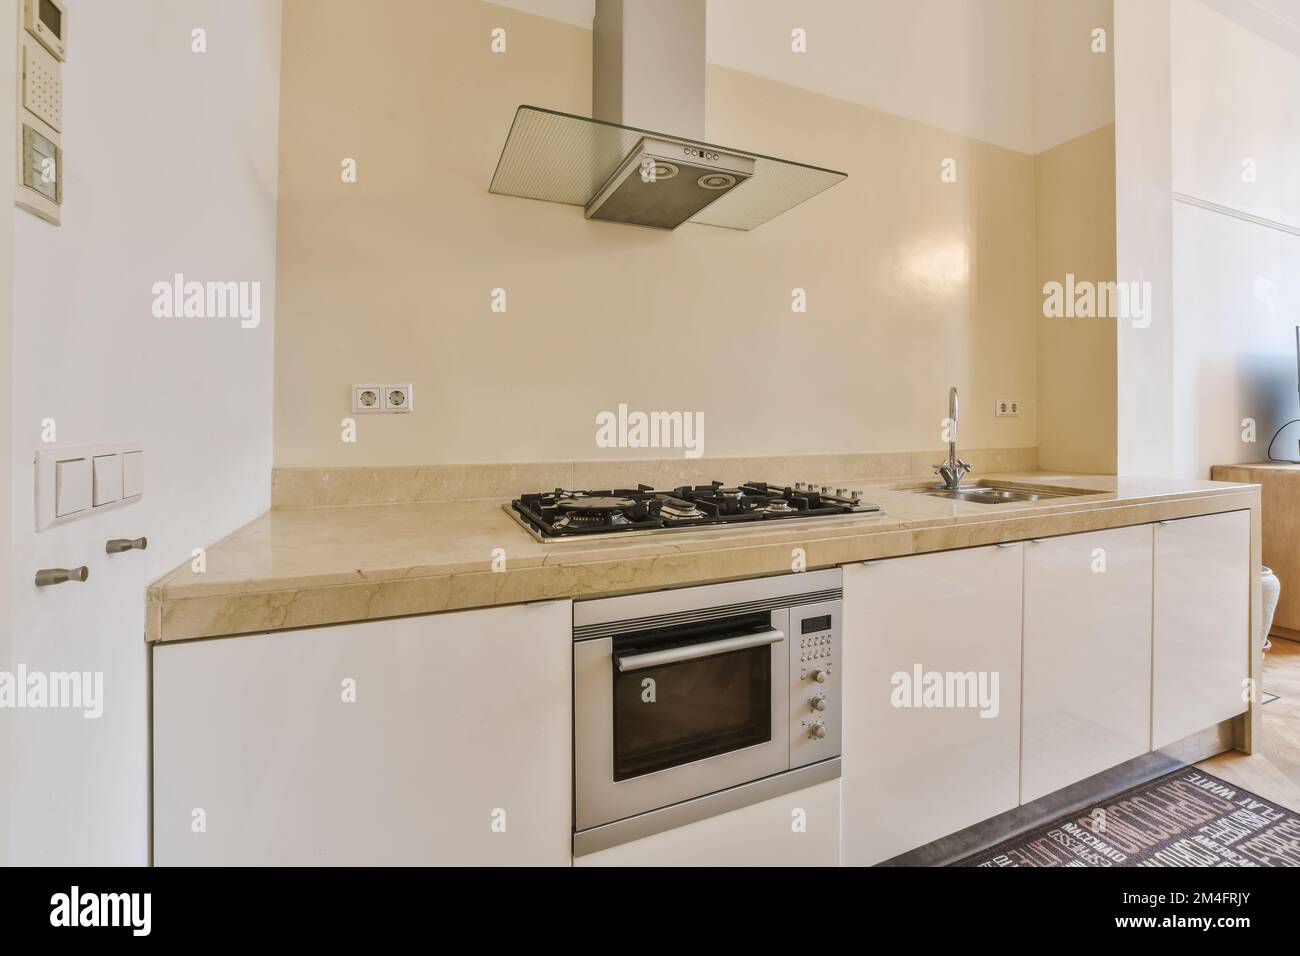 a kitchen with an oven, sink and dishwasher on the counter in this photo is taken from above Stock Photo